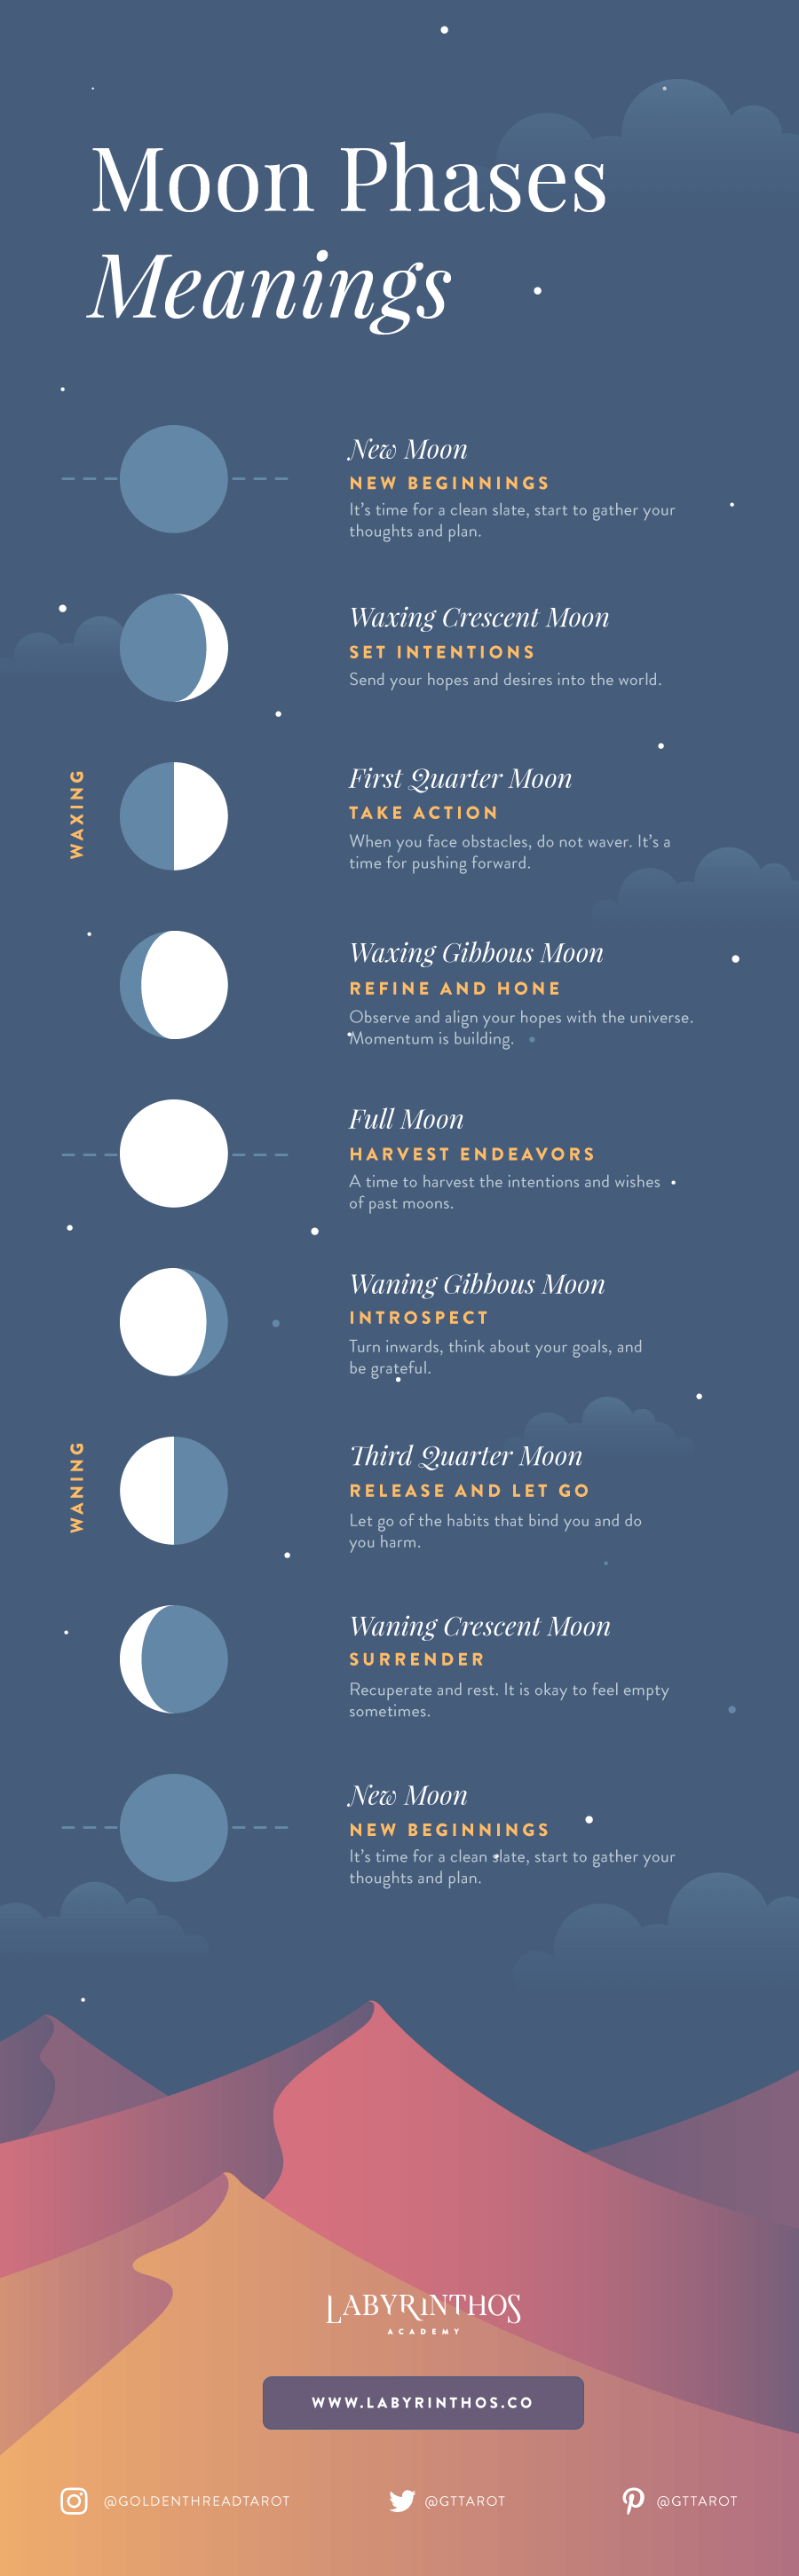 Moon Phases Meanings Infographic: A Beginner’s Framework For Following A22